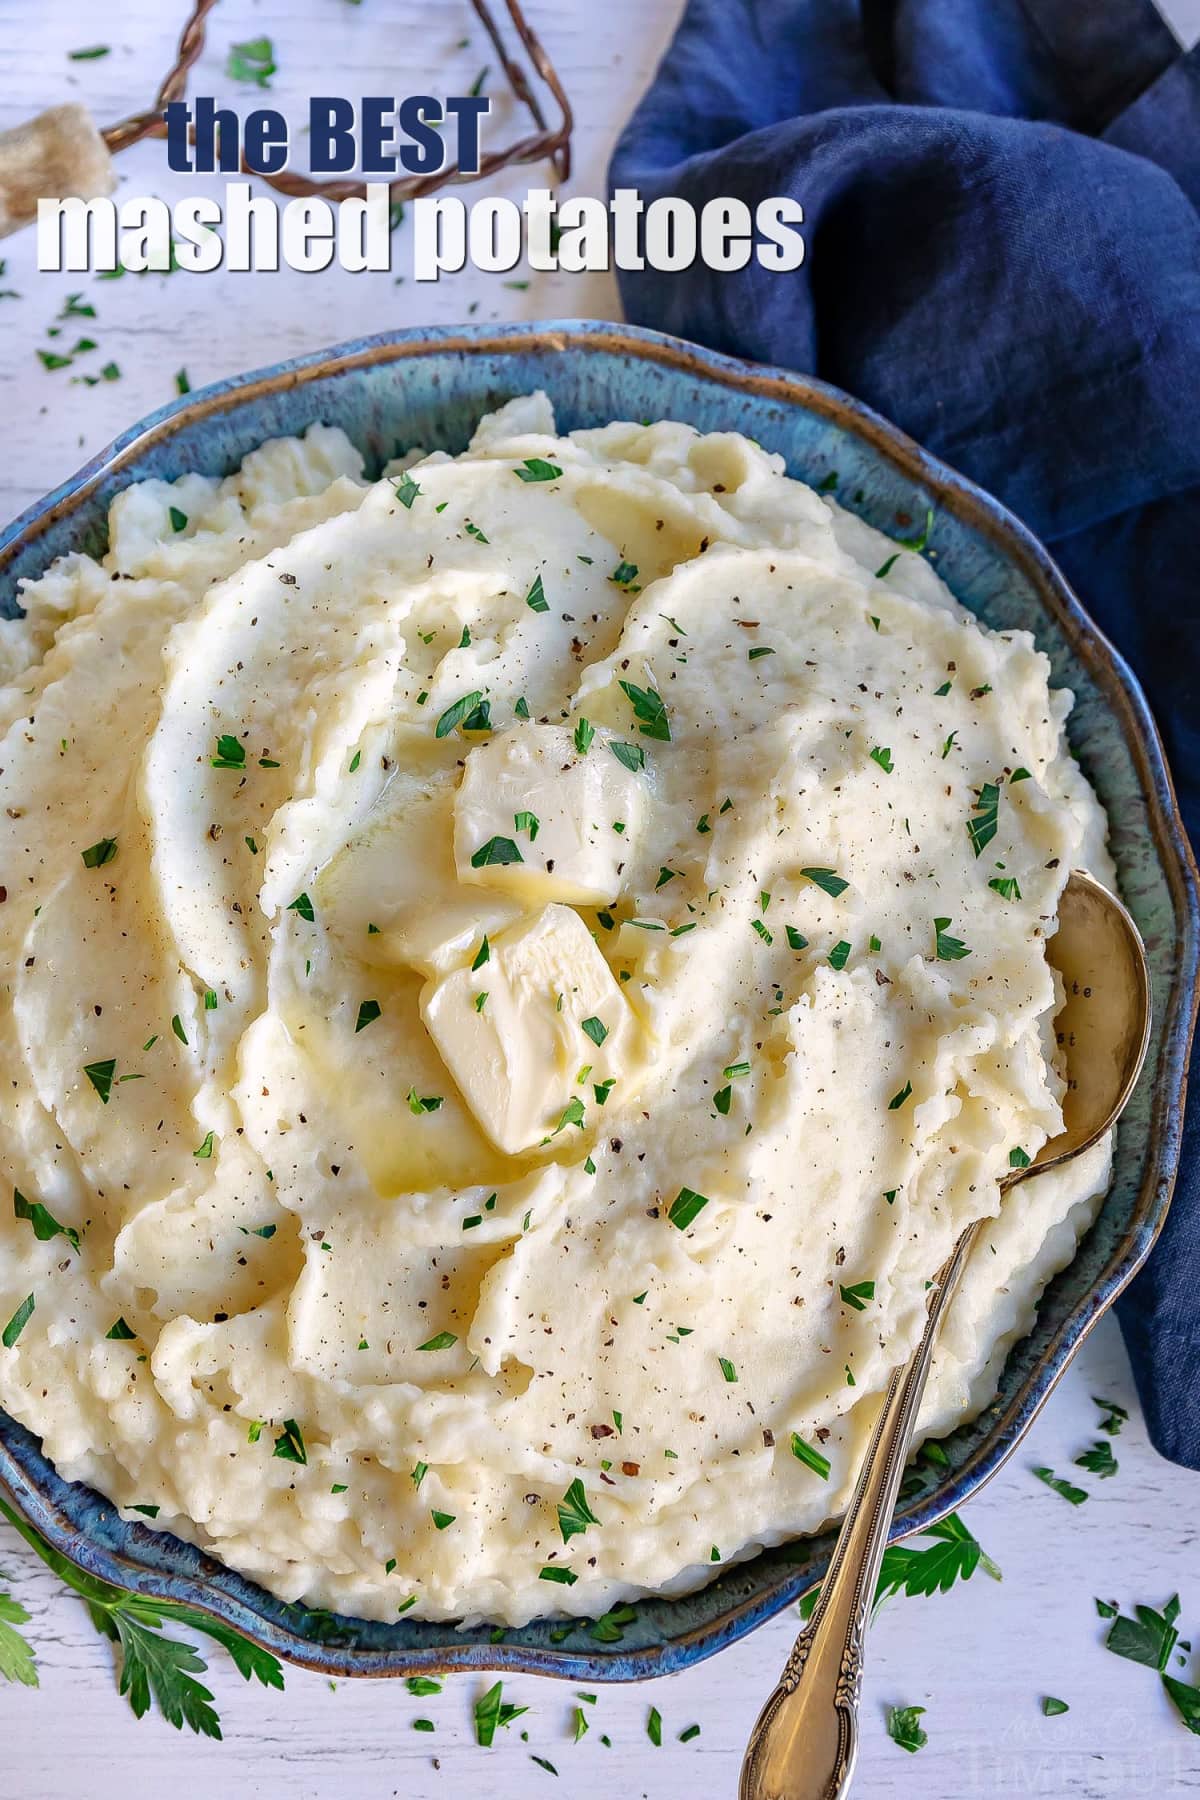 mashed potatoes recipe in bowl with spoon and title overlay at top